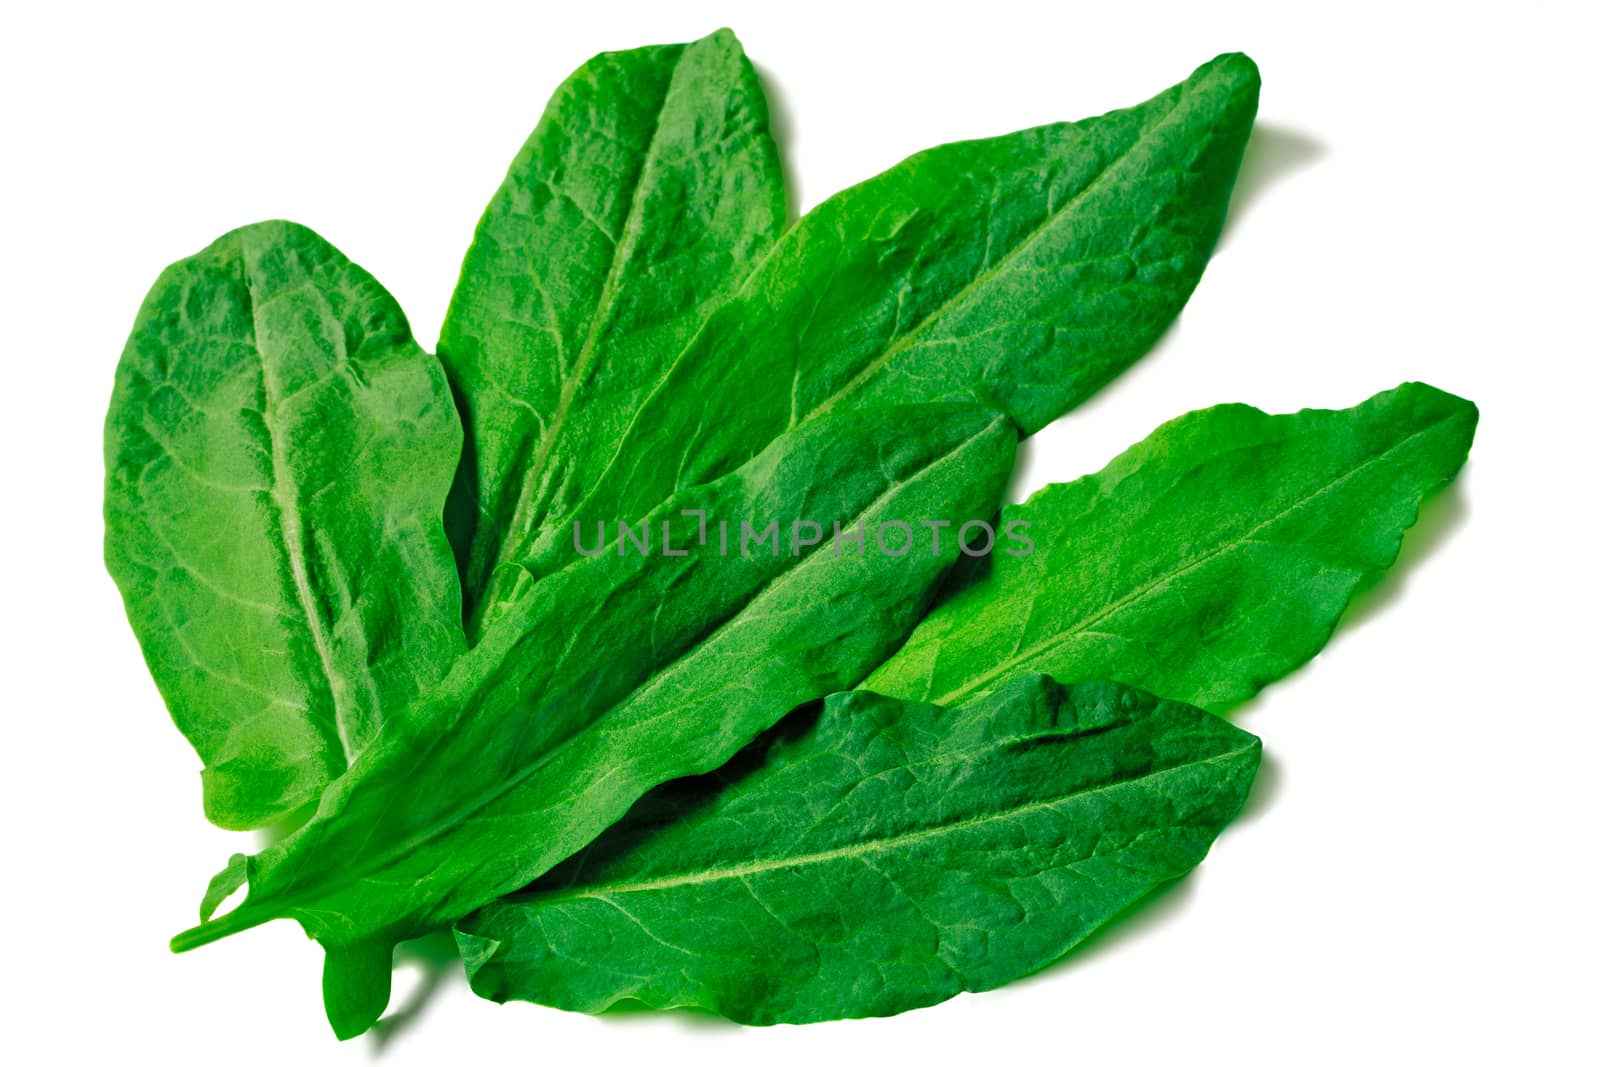 Young bright green leaves of spinach on a white background.